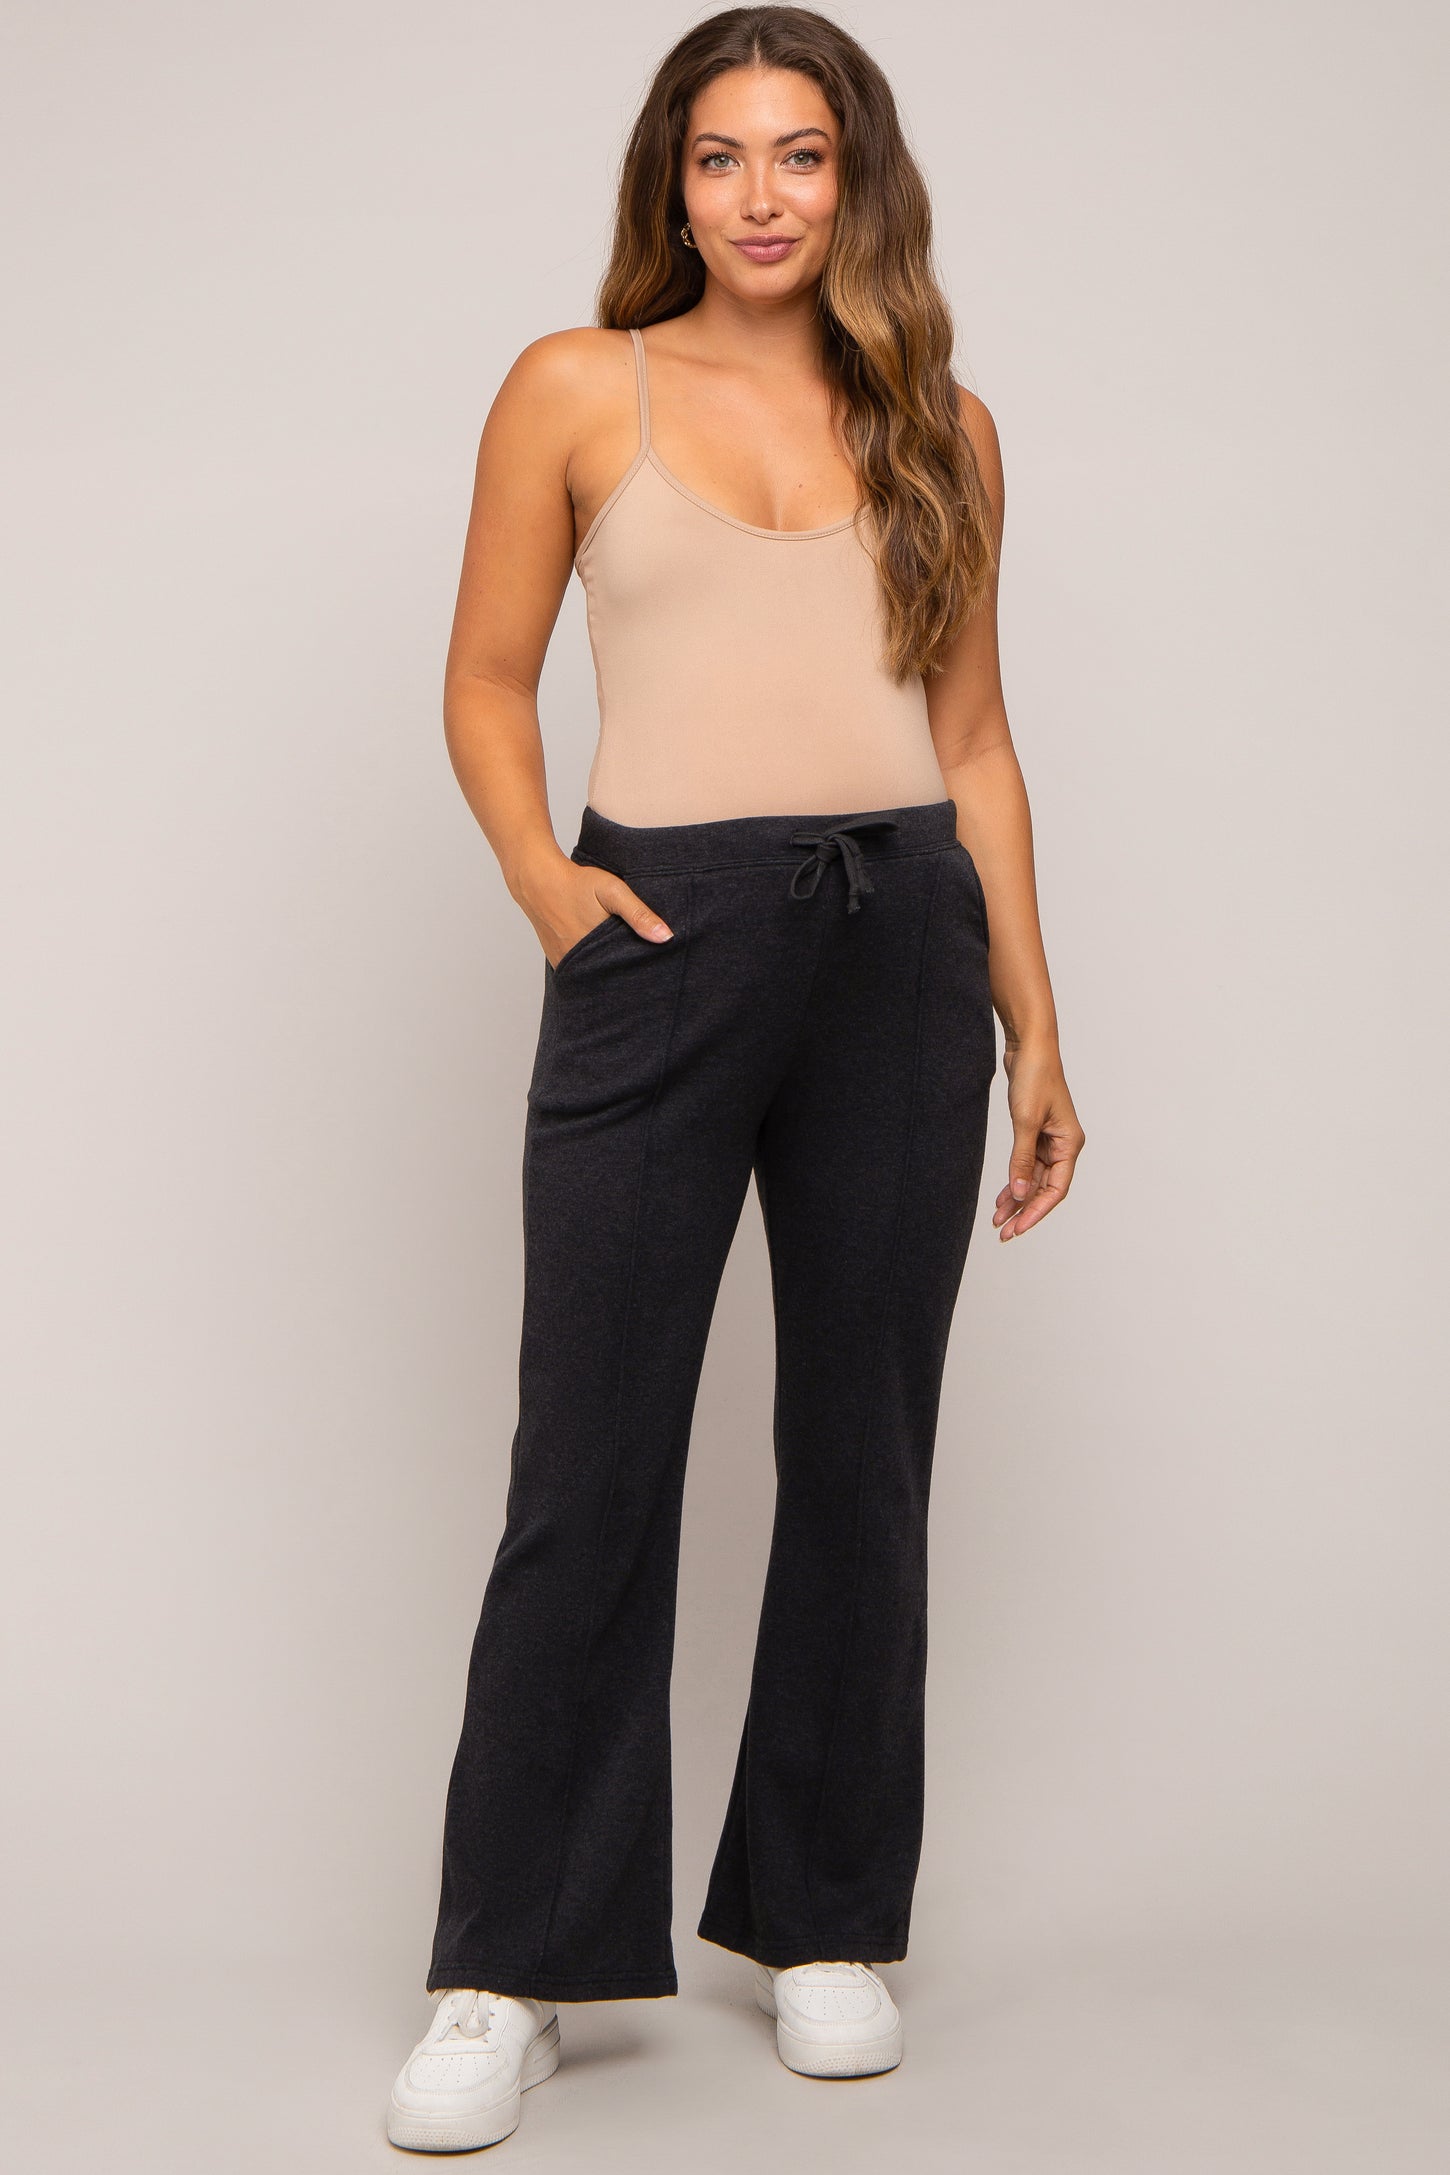 Charcoal Faux Fur Lined Maternity Flare Lounge Pants– PinkBlush